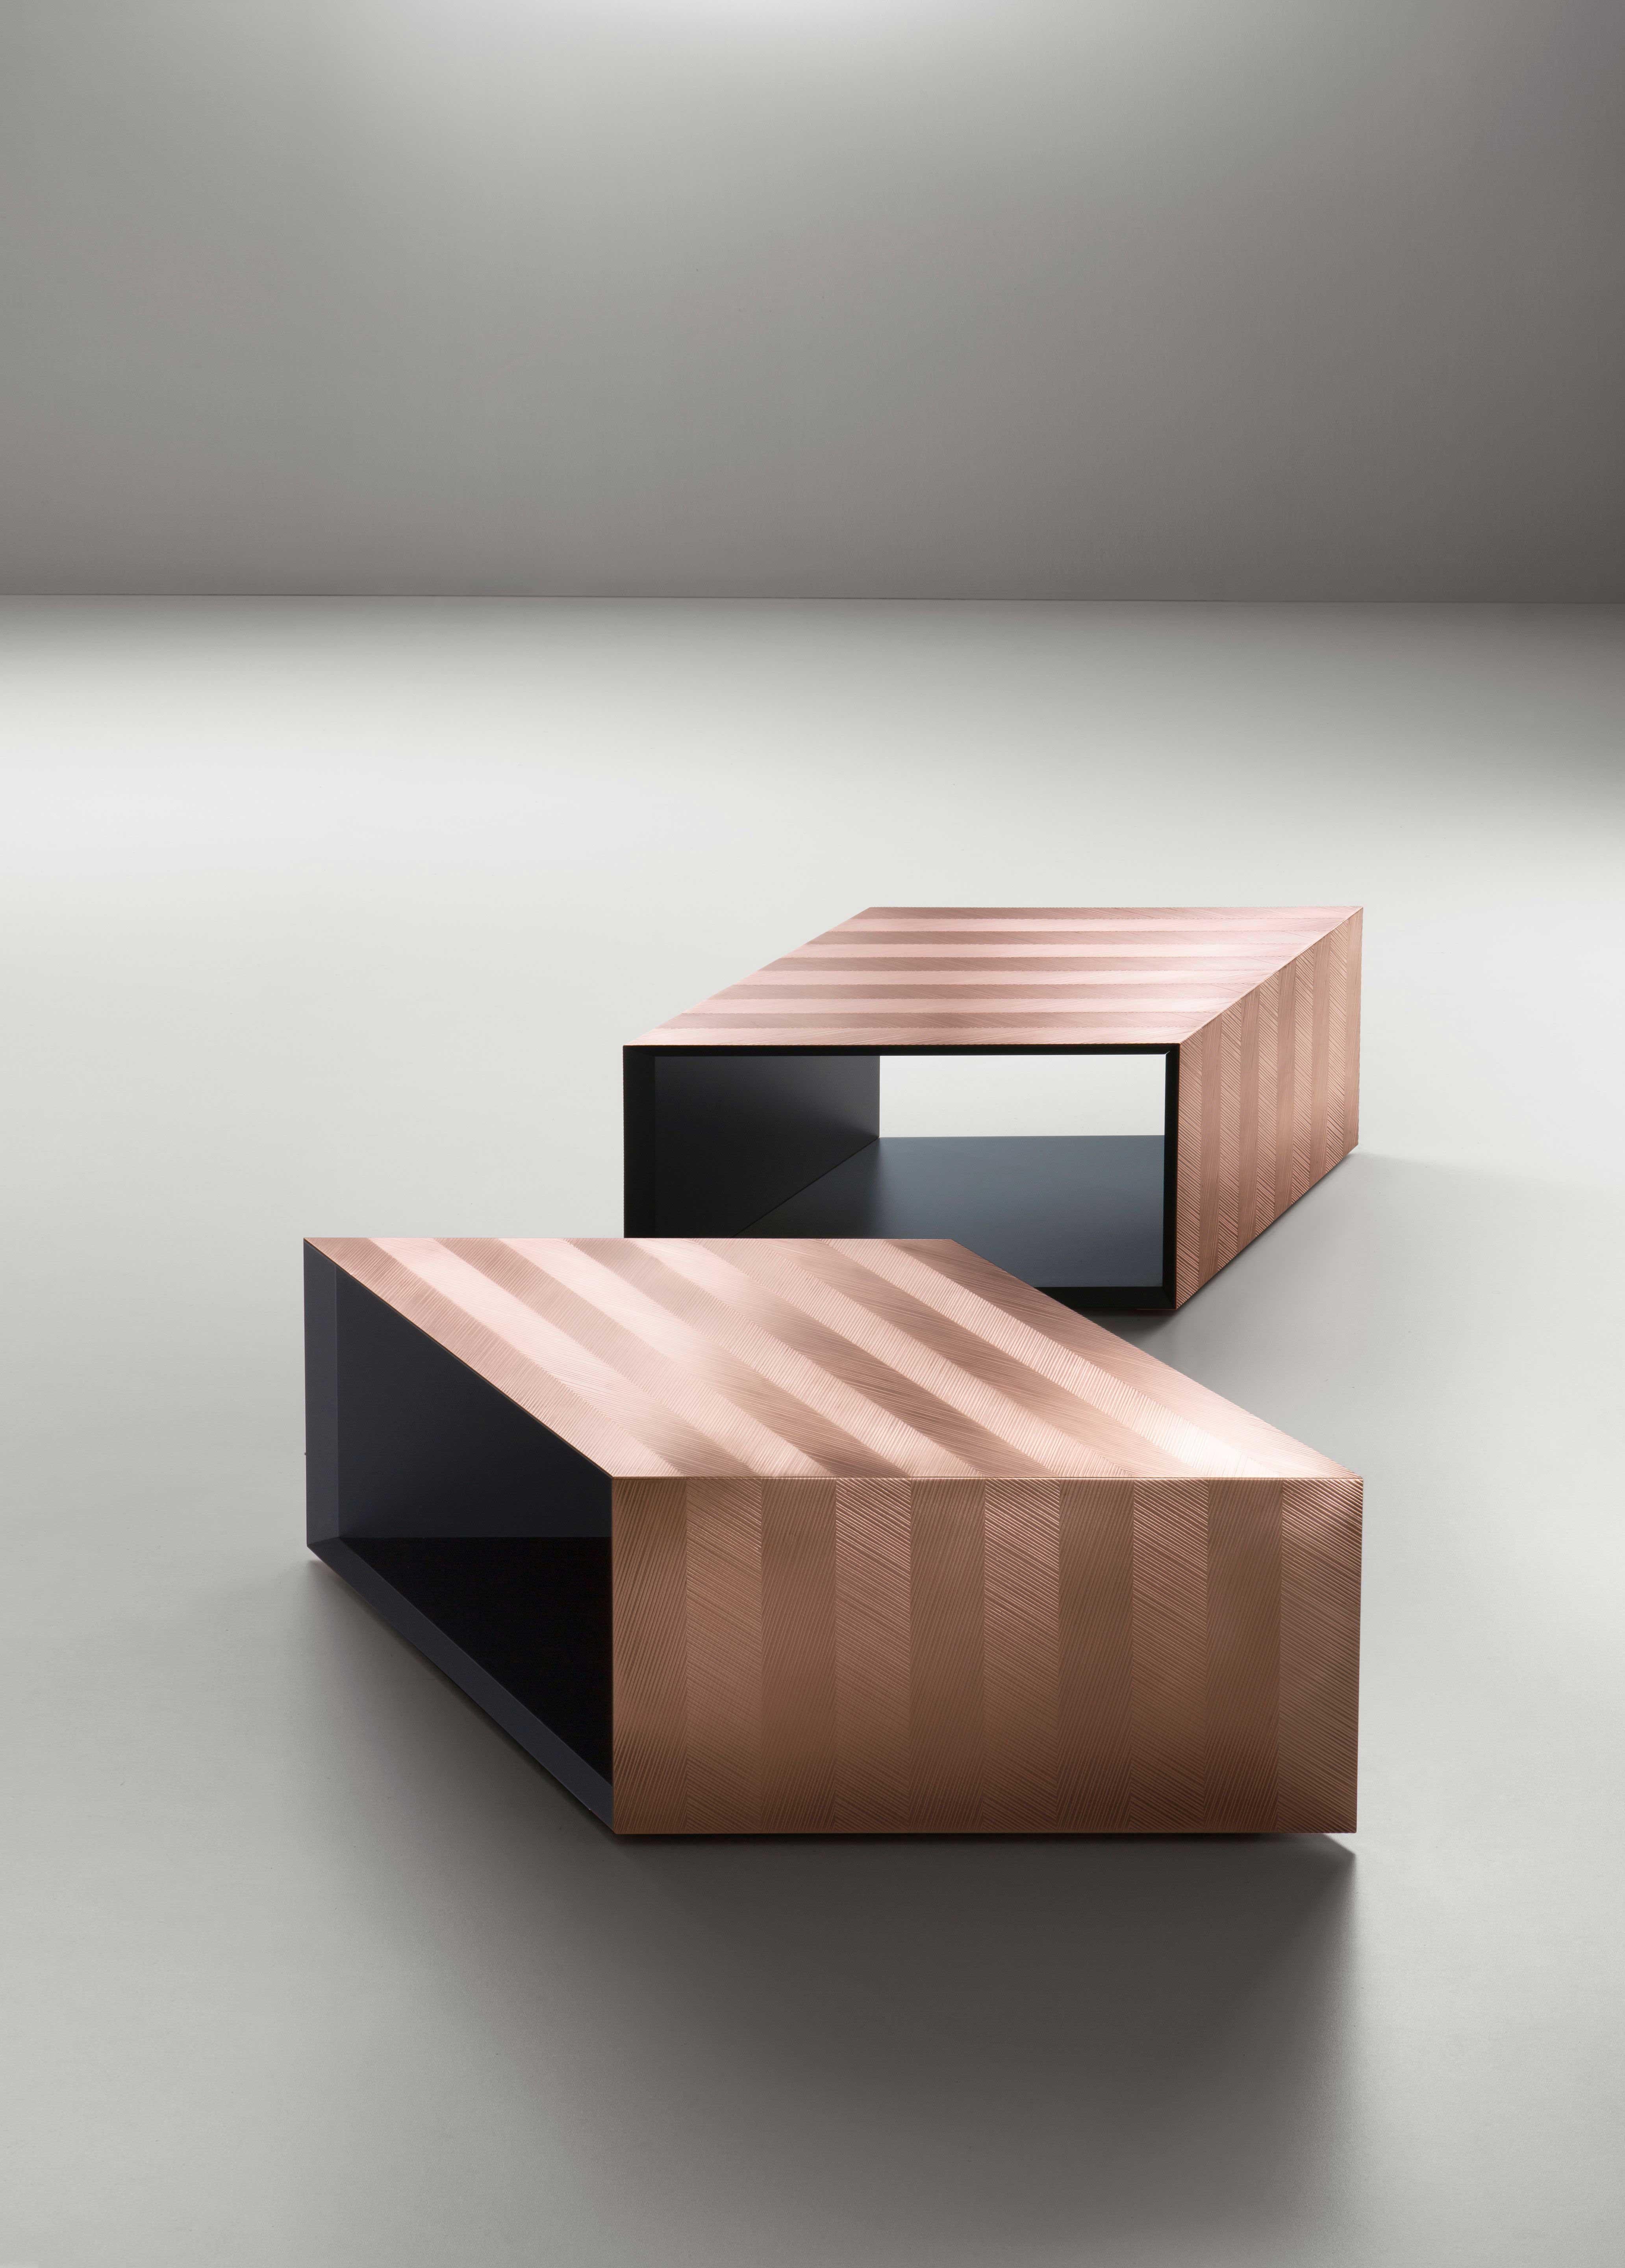 Alpha Modular Coffee Table designed by Martinelli Venezia for DeCastelli.The table consists of three rhomboid pieces which will be either moved around or rotated to obtain numerous shapes. The DeErosion technique is used for producing a natural